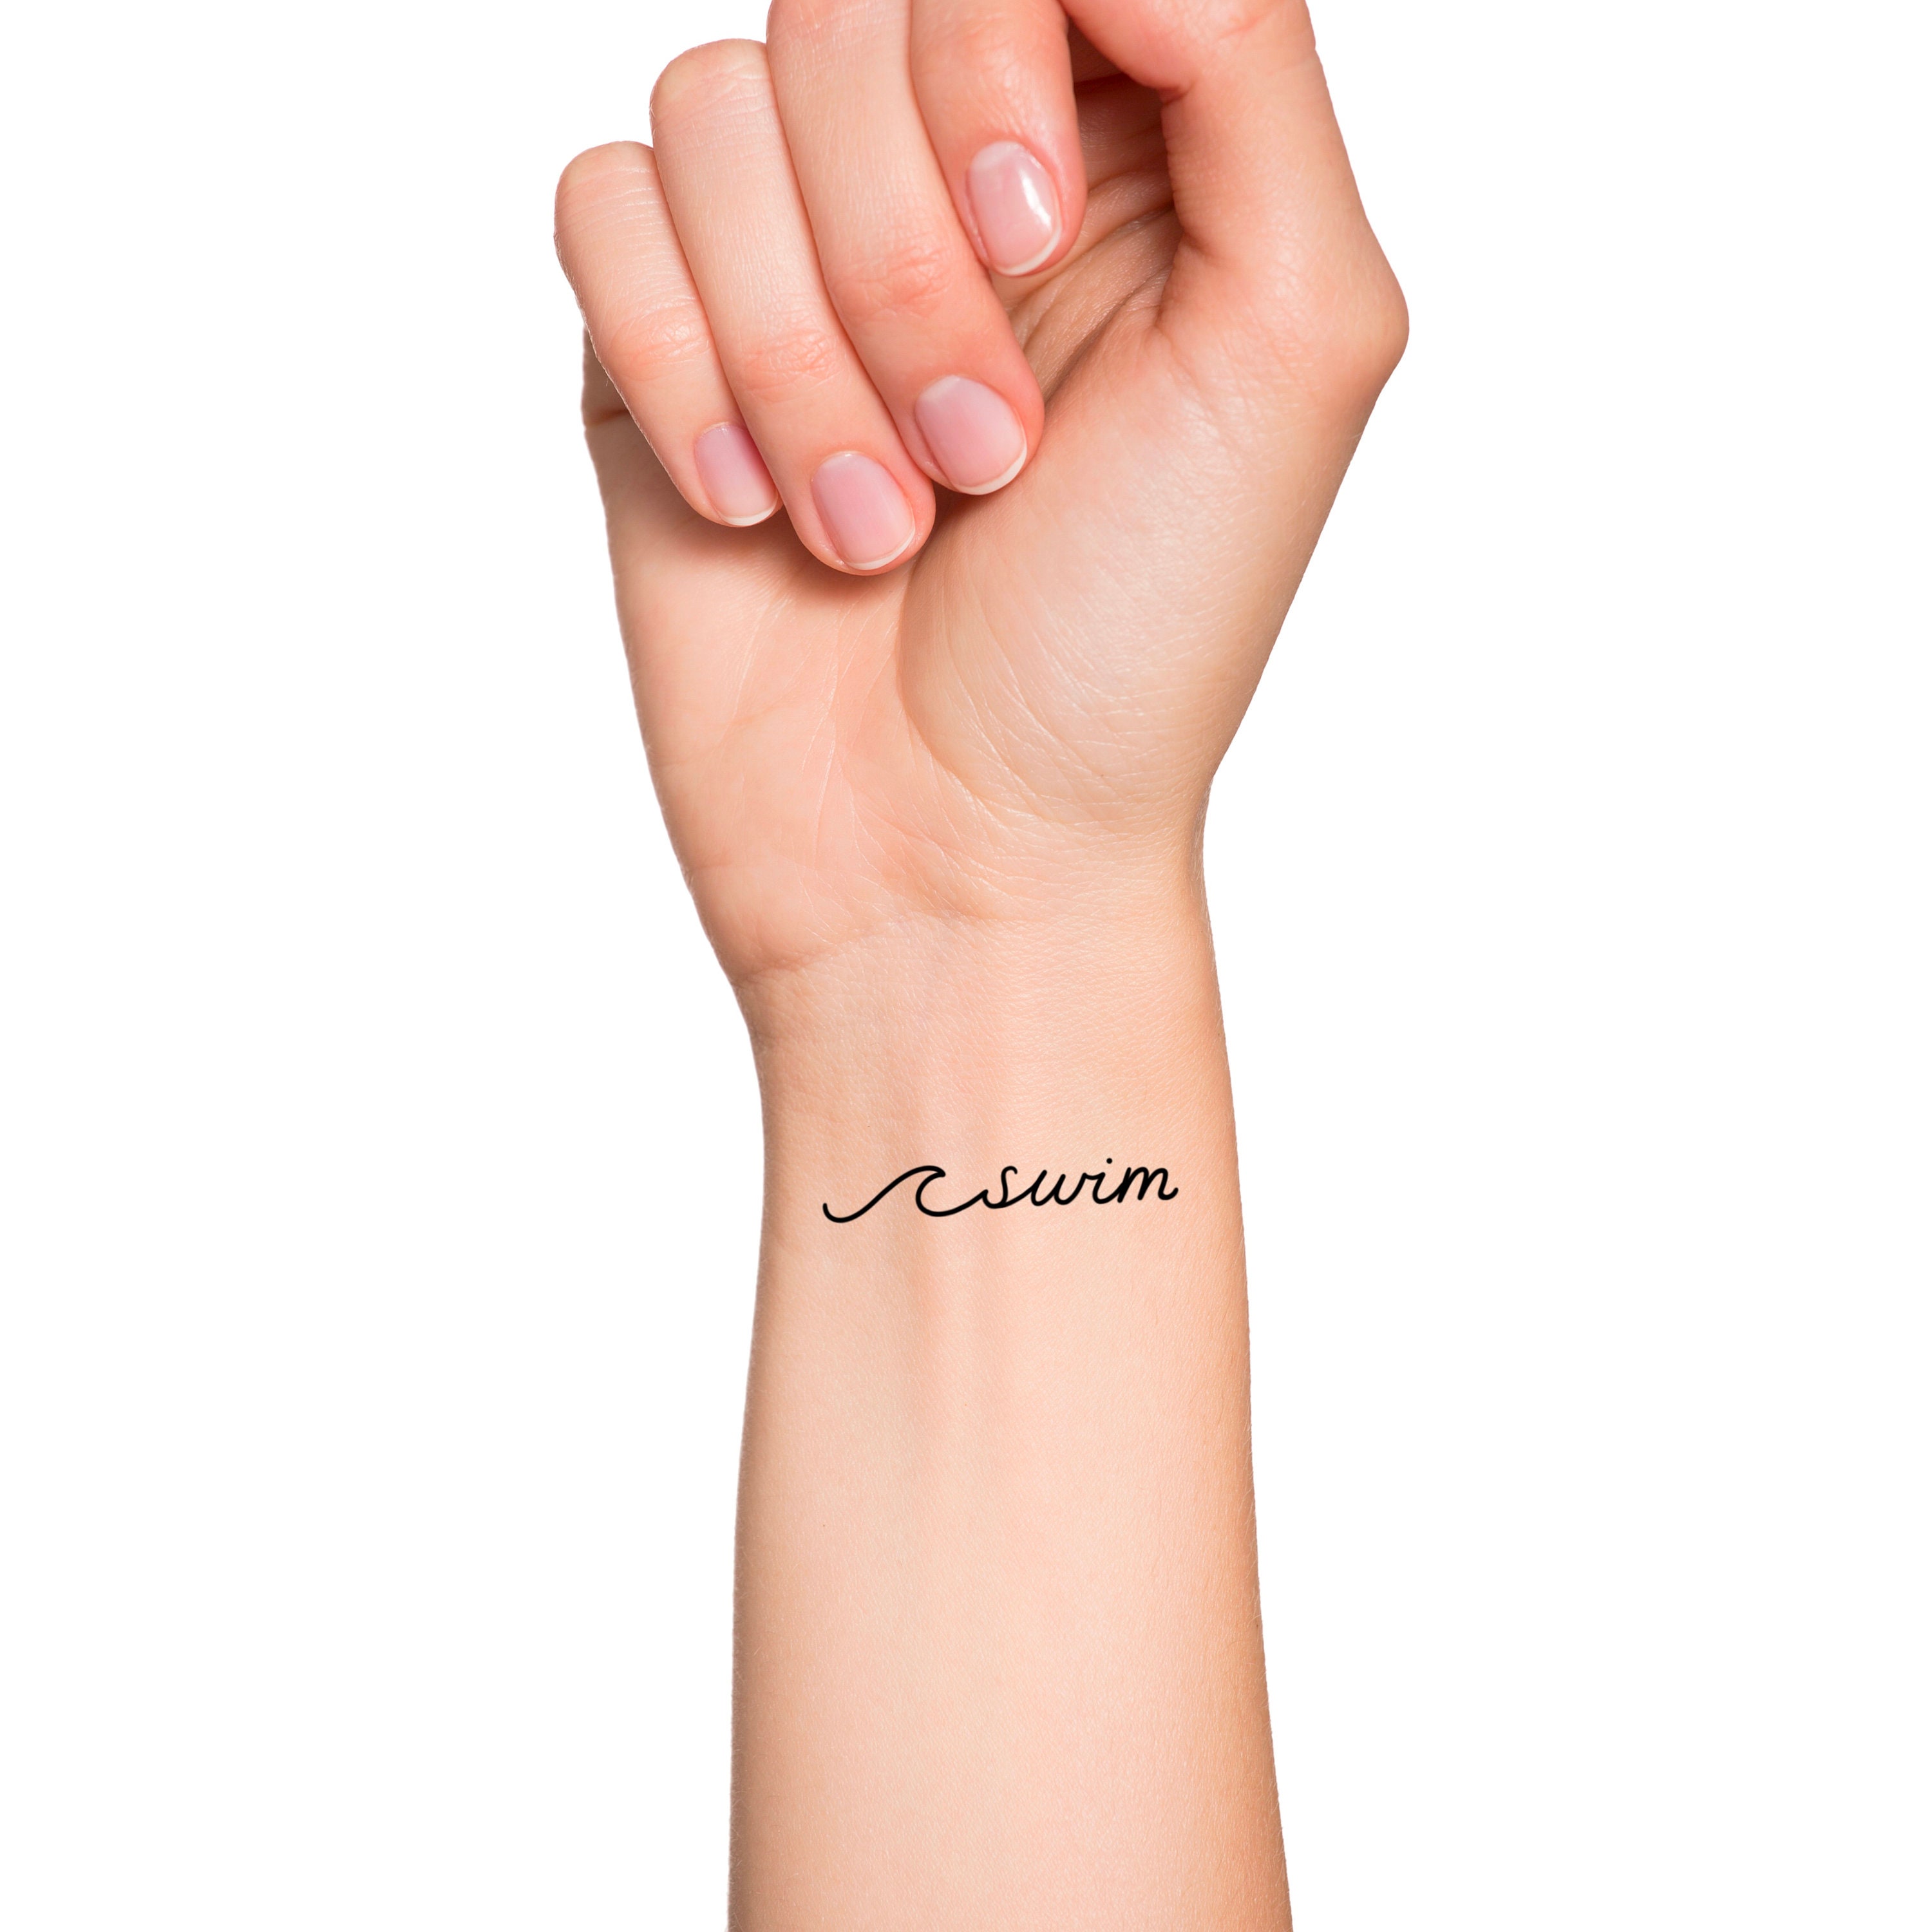 Details more than 147 single word tattoos super hot